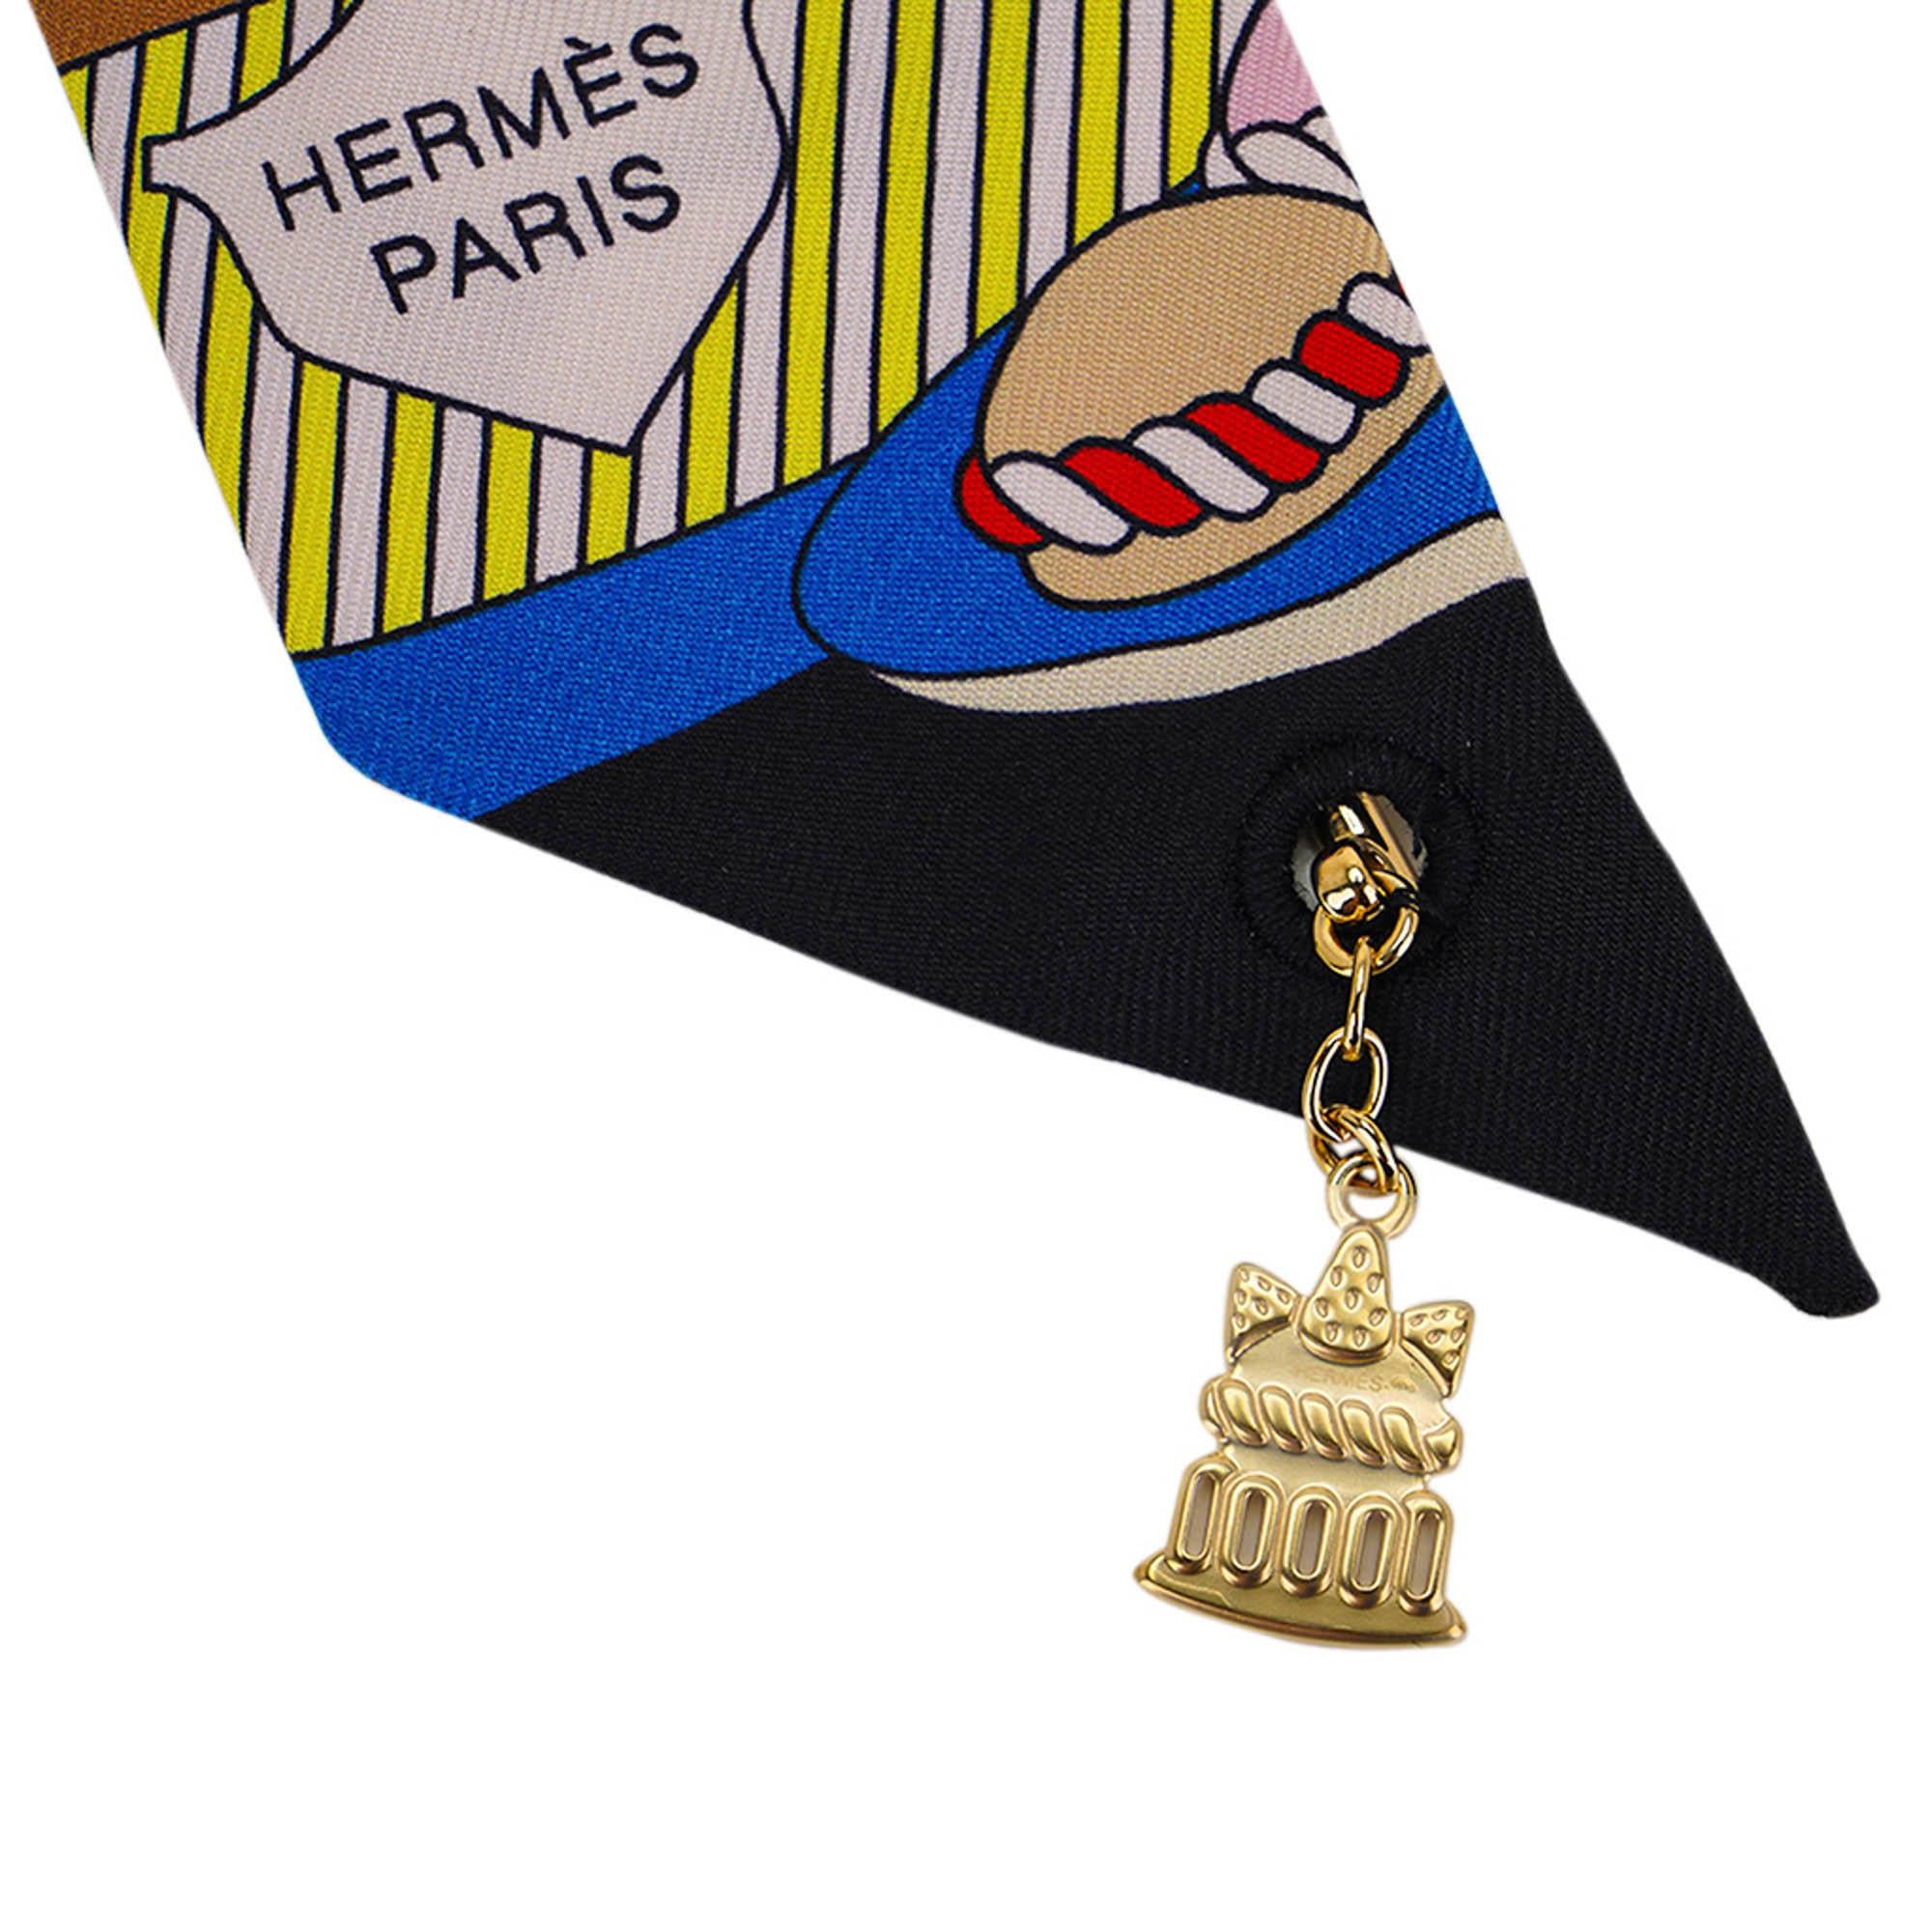 Mightychic offers an Hermes silk scarf Special Edition Charm La Patisserie Francaise Charm Twilly set of 2.
Featured in Noir, Blanc and Bleu colorway.
Designed by Pierre Marie.
Pays tribute to the 20th anniversary of the Twilly scarf.
A small charm